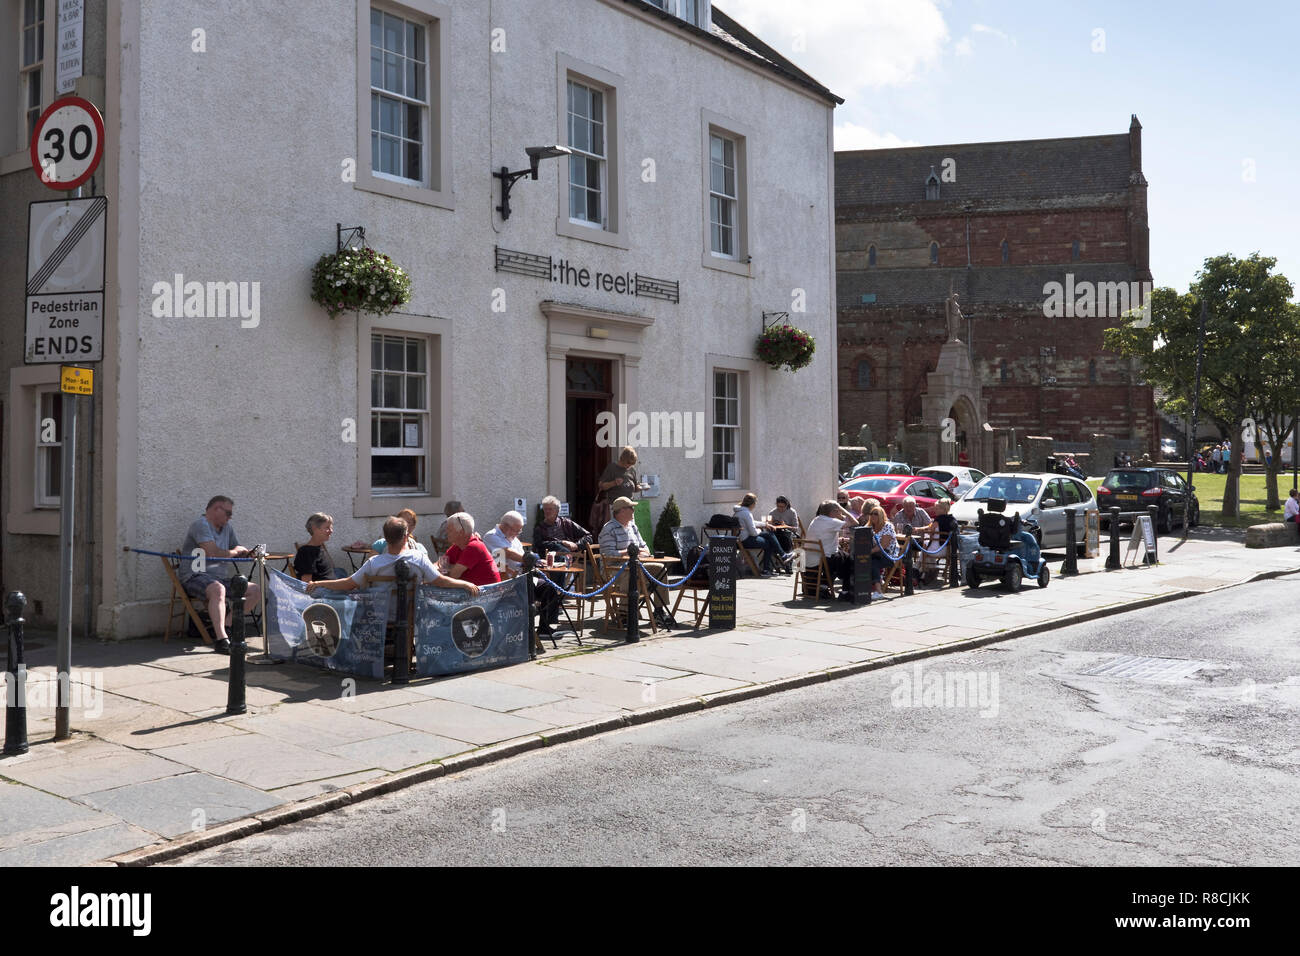 dh Reel Cafe KIRKWALL ORKNEY Tourist sitting outside drinking street cafes sunshine people holiday makers Stock Photo